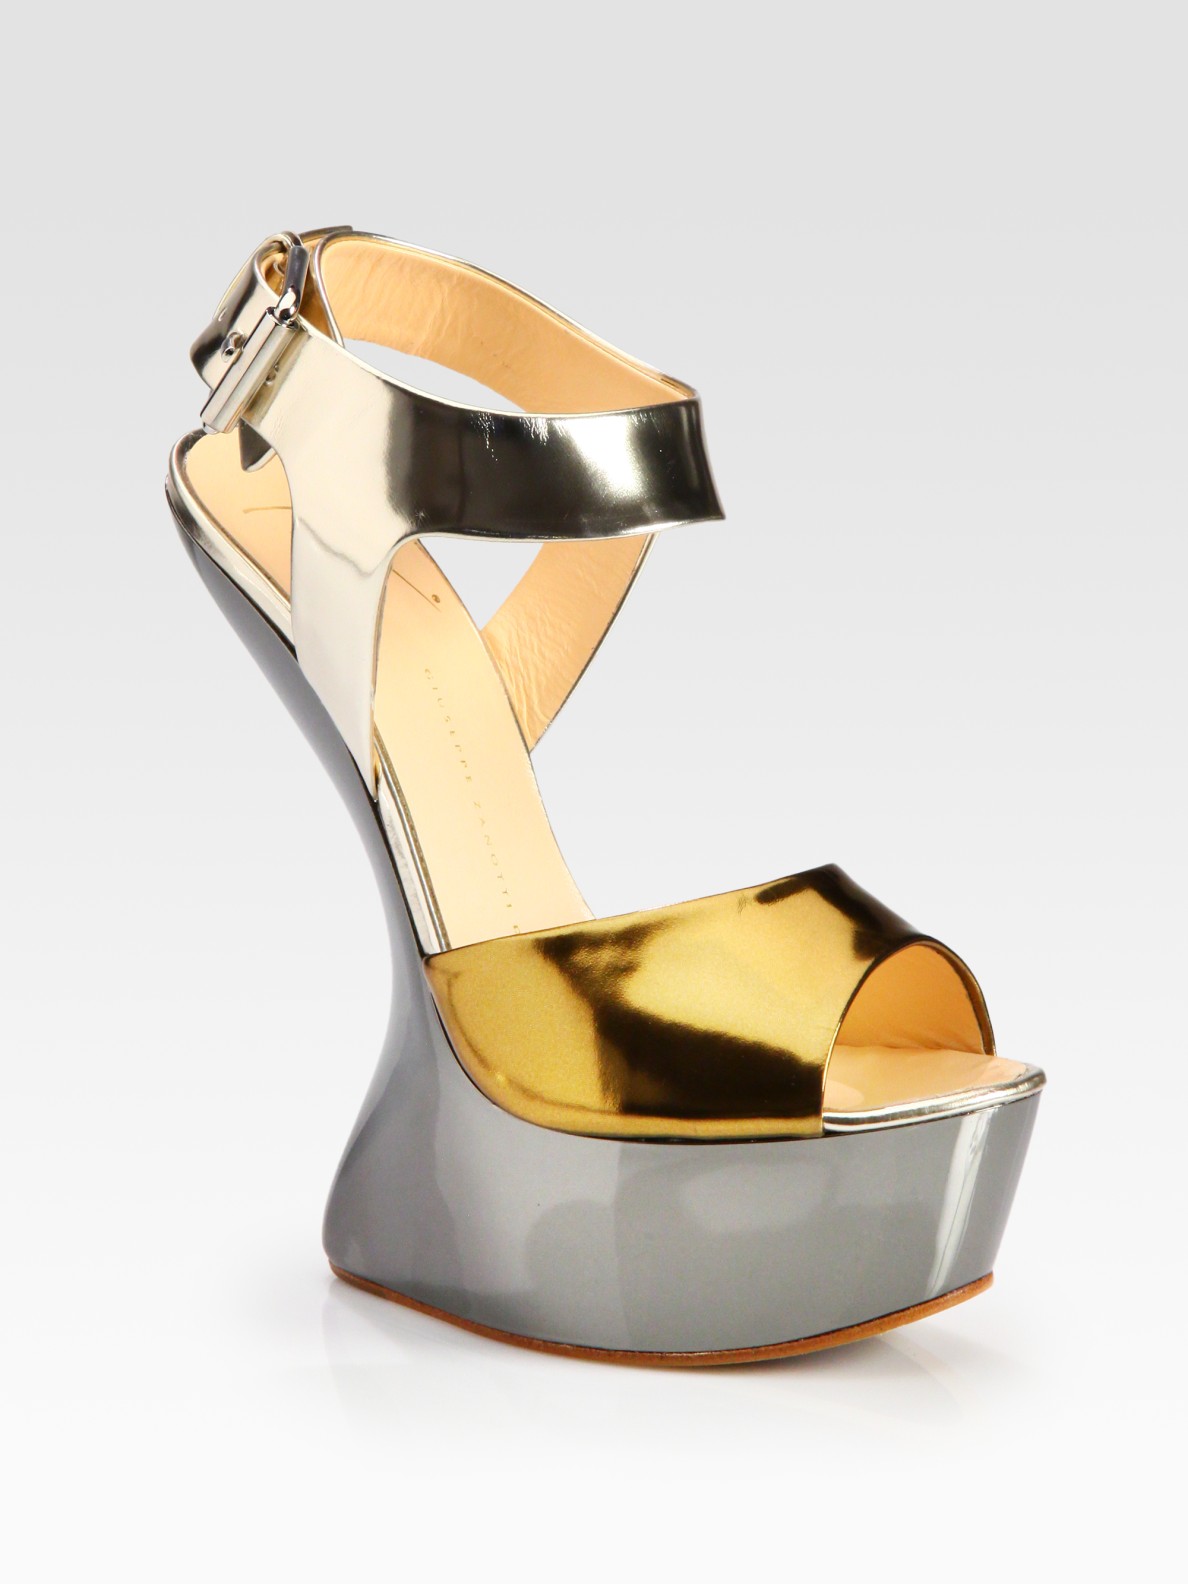 Lyst - Giuseppe Zanotti Metallic Patent Leather Curved Wedge Sandals in ...